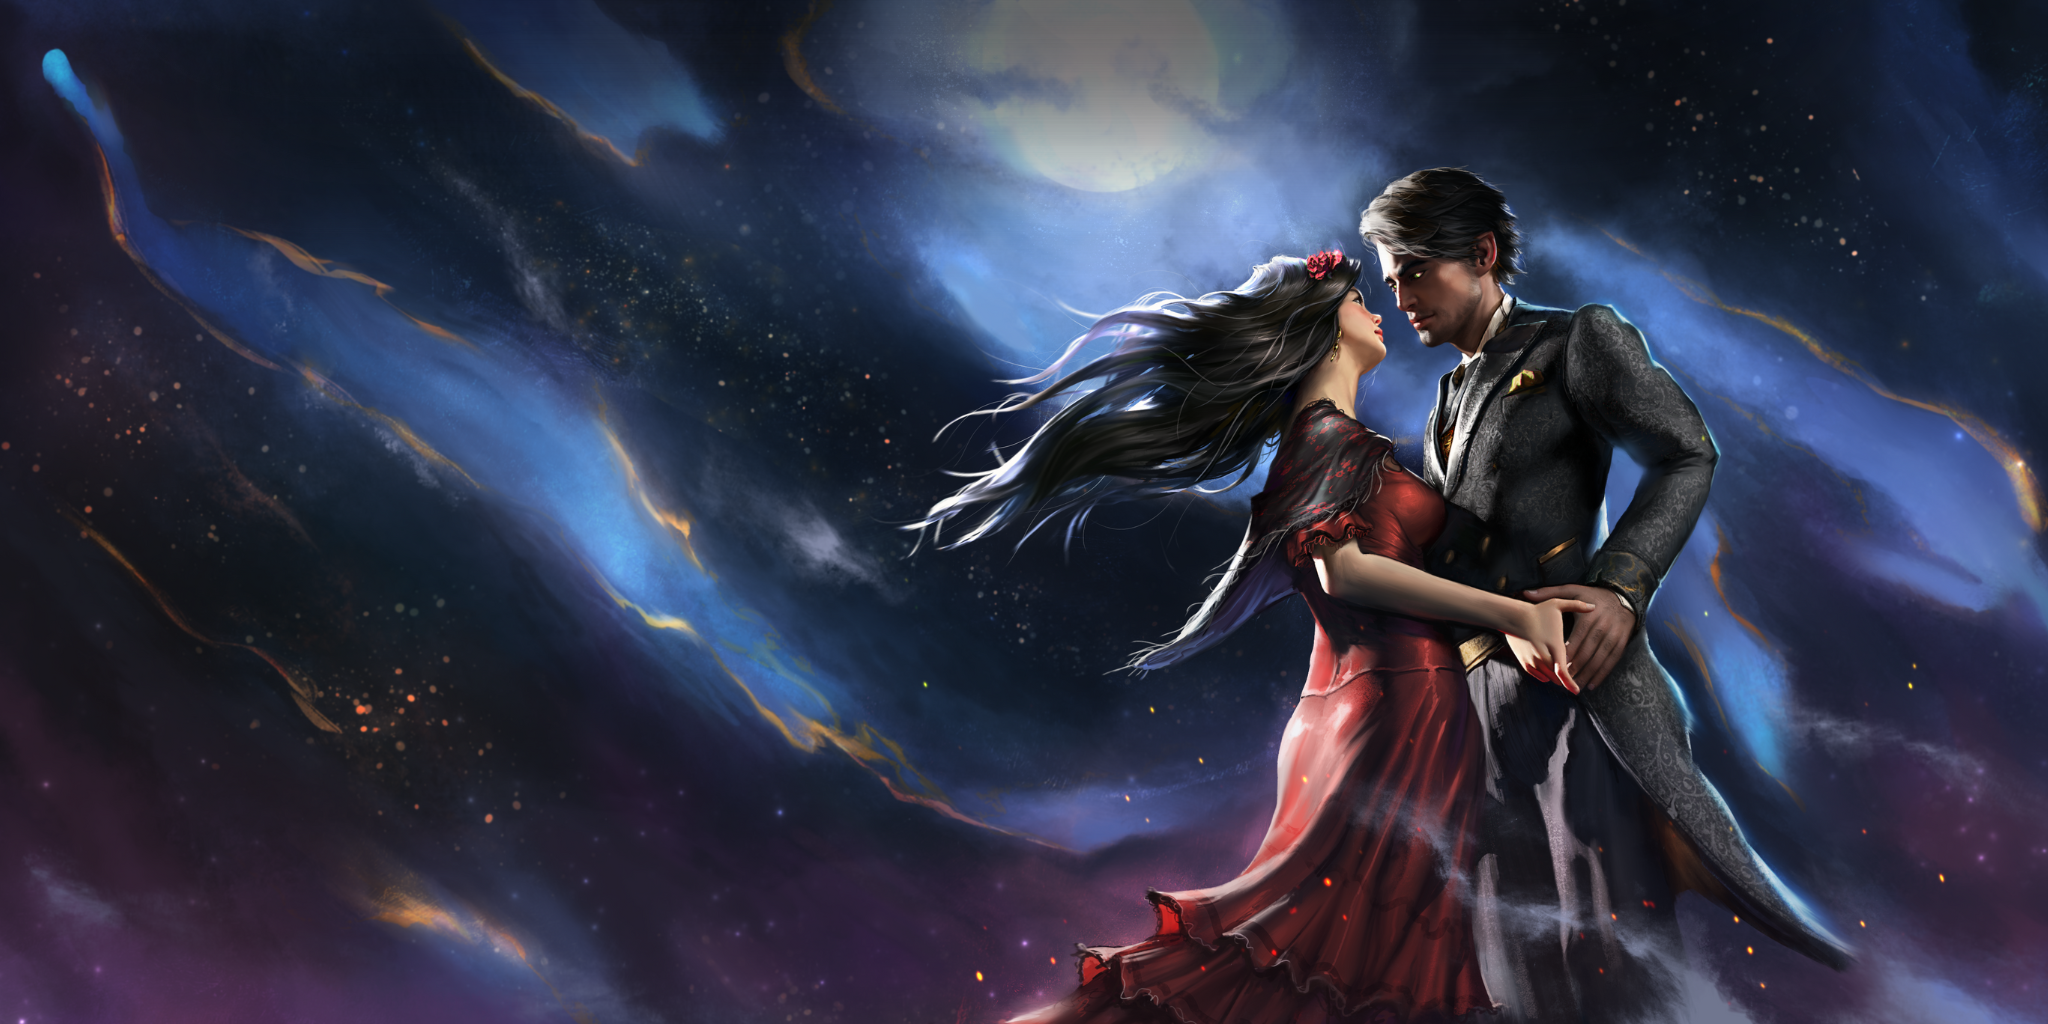 Swoony fantasy romance character art from The Starlit Prince